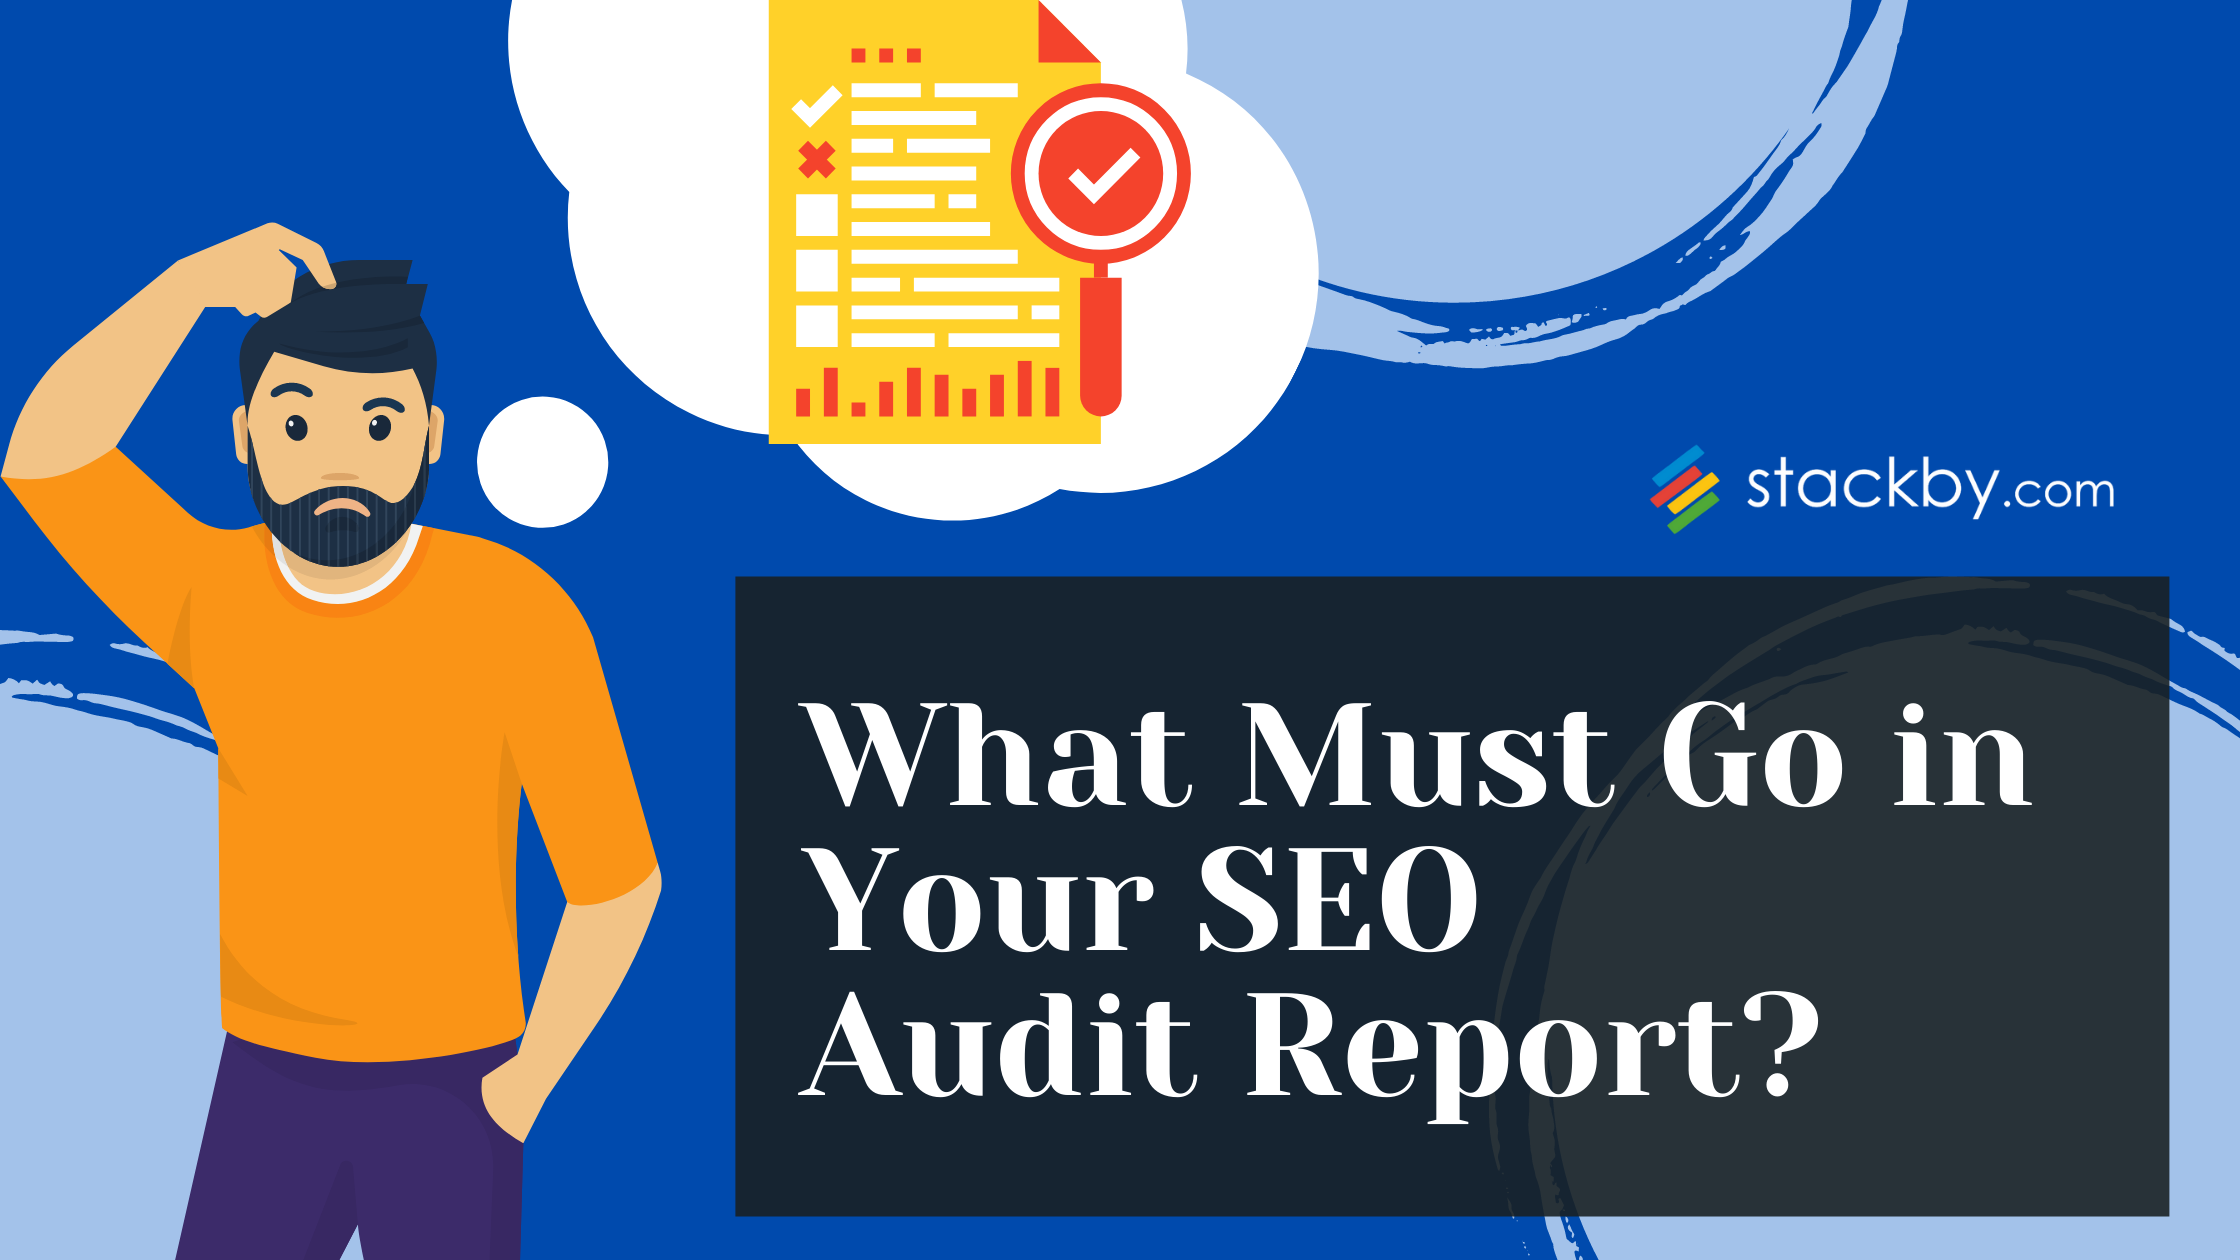 What Must Go in Your SEO Audit Report? 12 Checklists You Can't Miss!